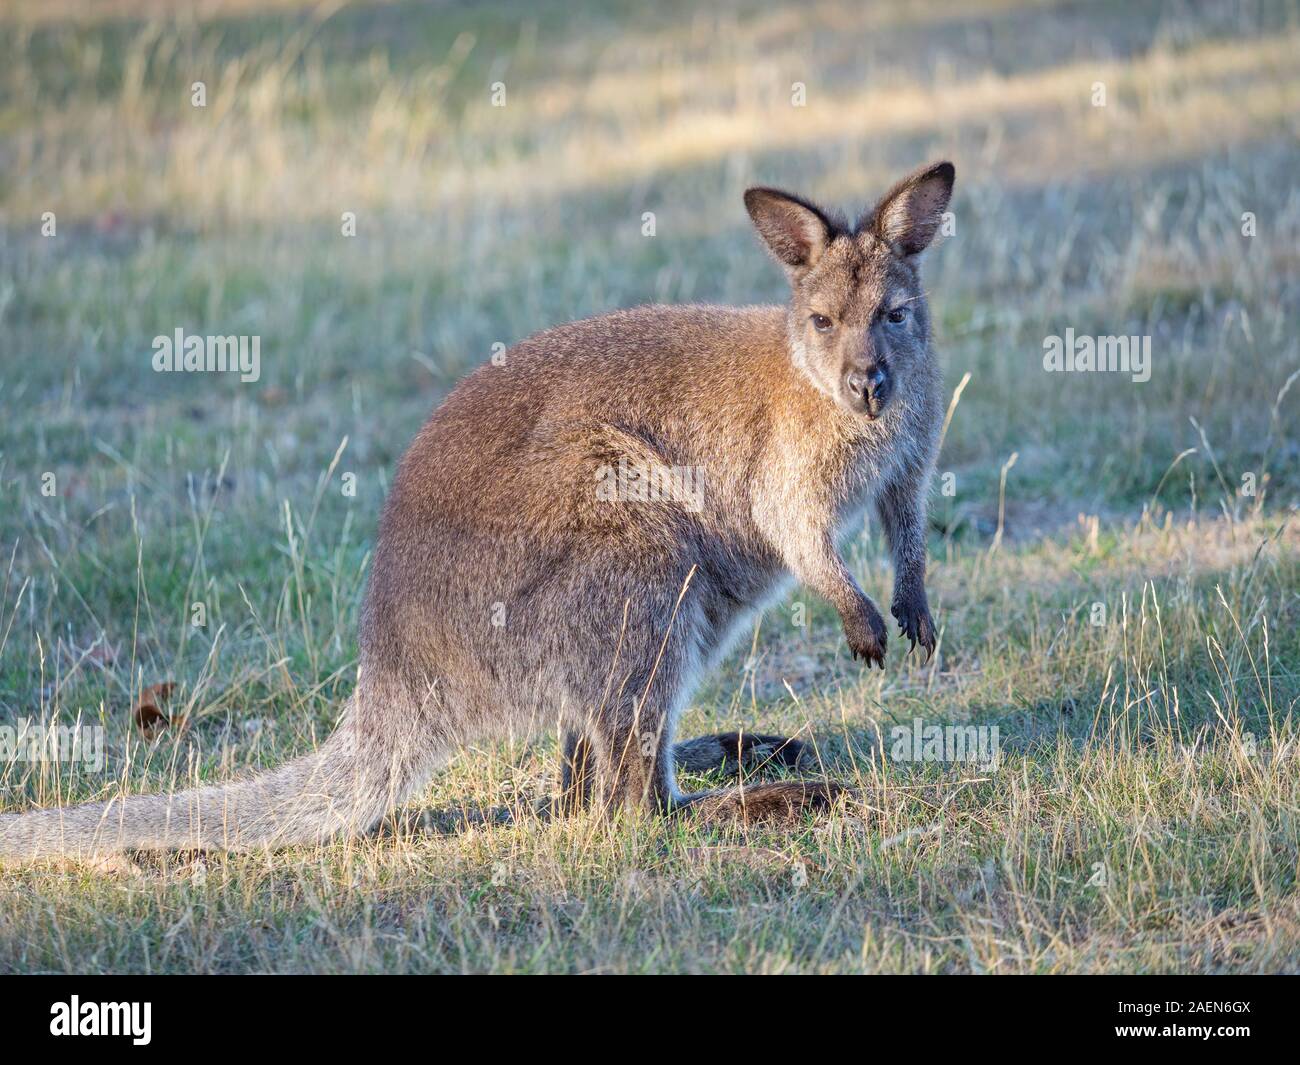 The red-necked wallaby or Bennetts wallaby (Macropus rufogriseus) is a medium-sized macropod marsupial found in Australia. Stock Photo